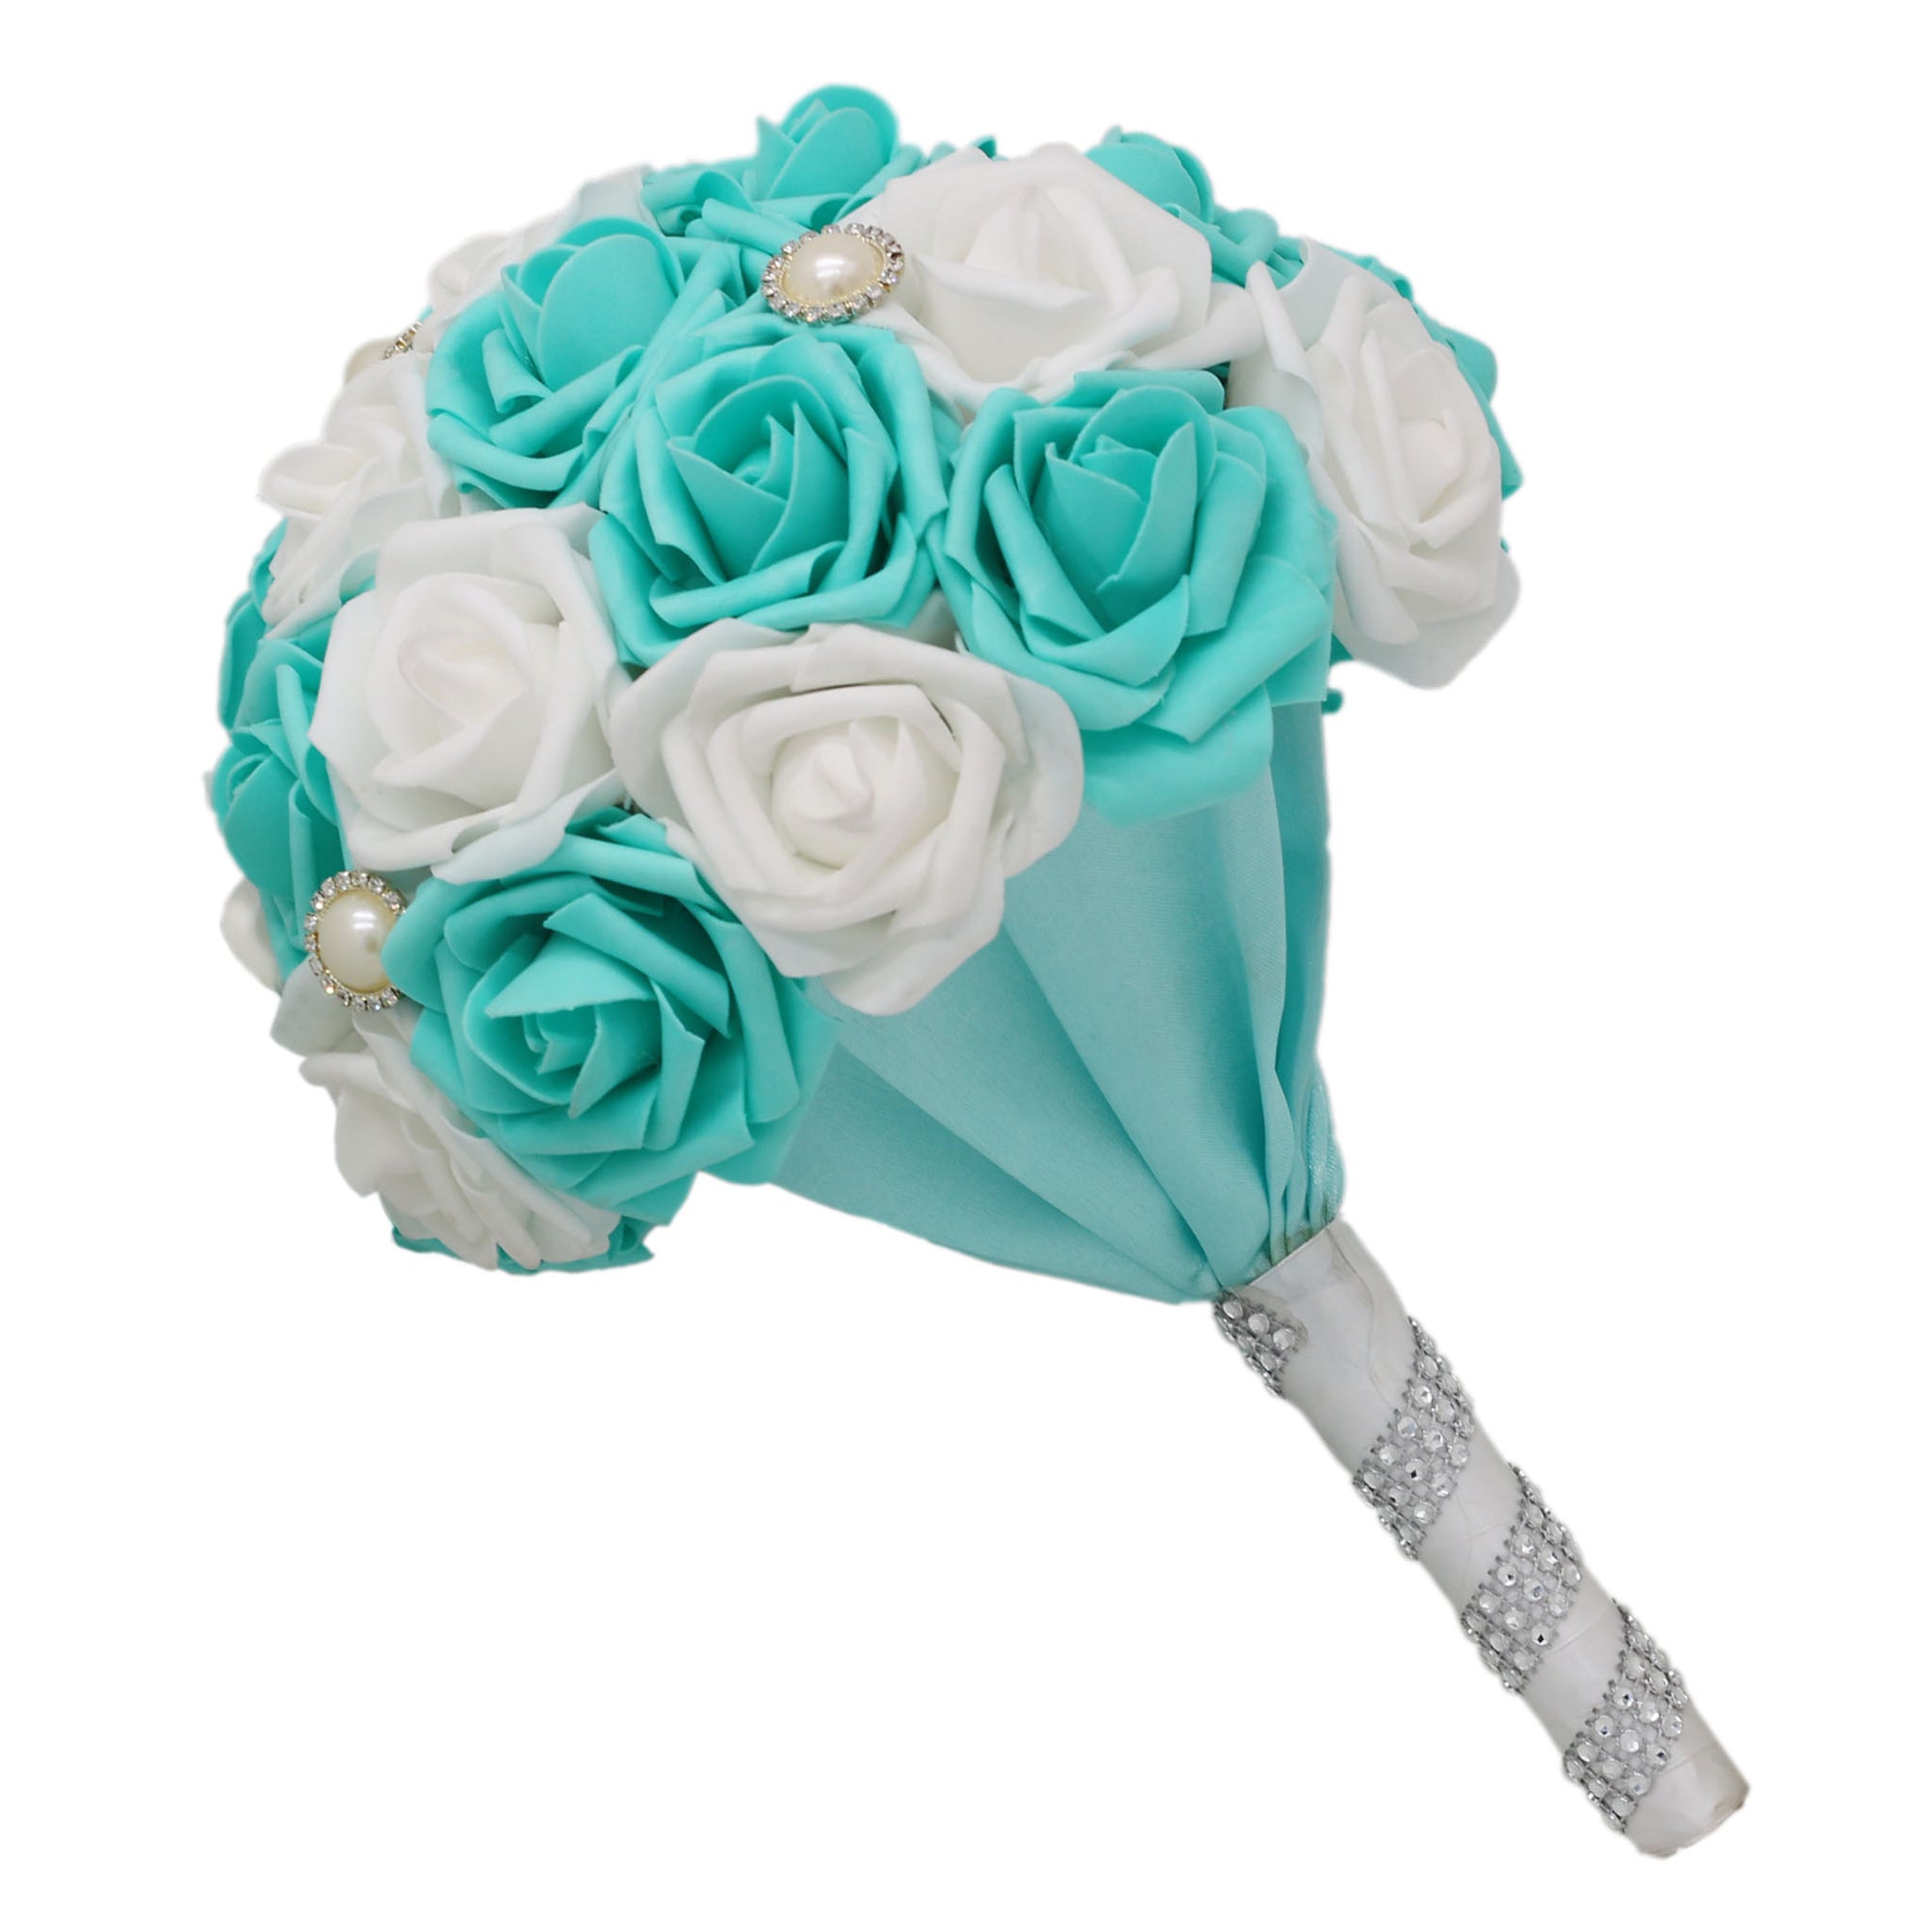 Bridal Flower Bouquet Teal and White Roses Artificial Bouquet